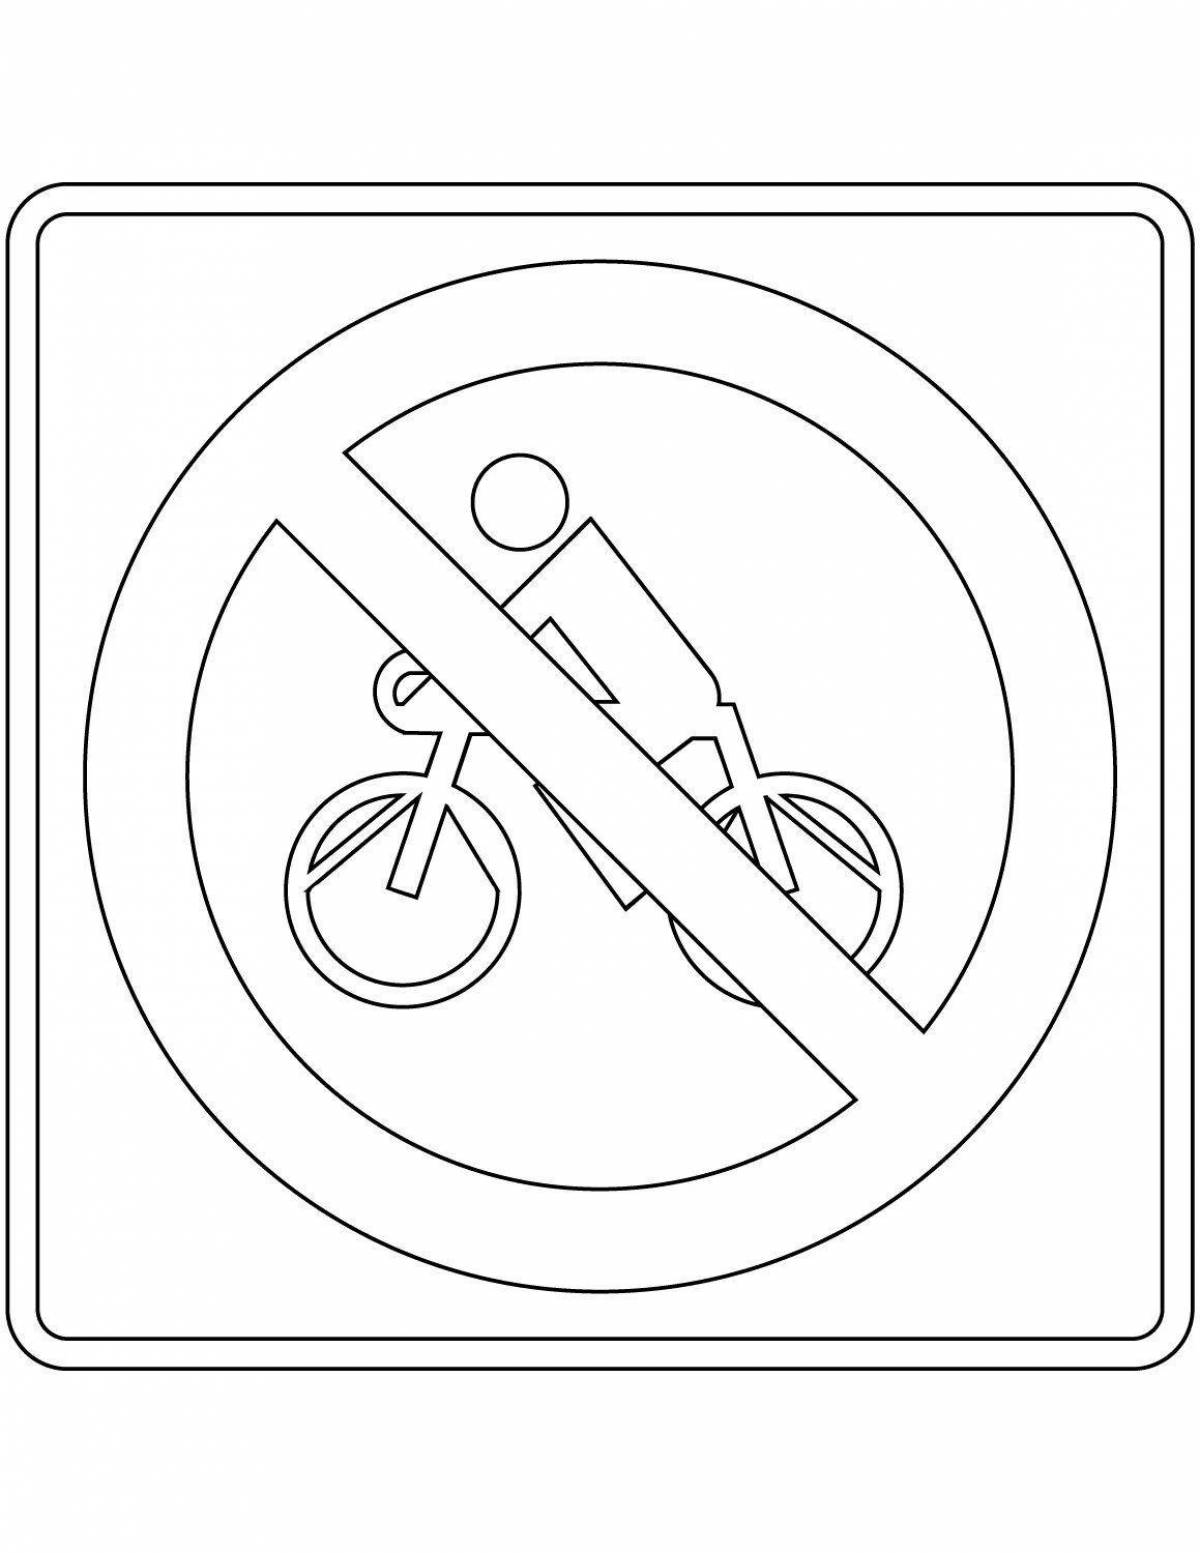 Coloring page magic prohibition road sign